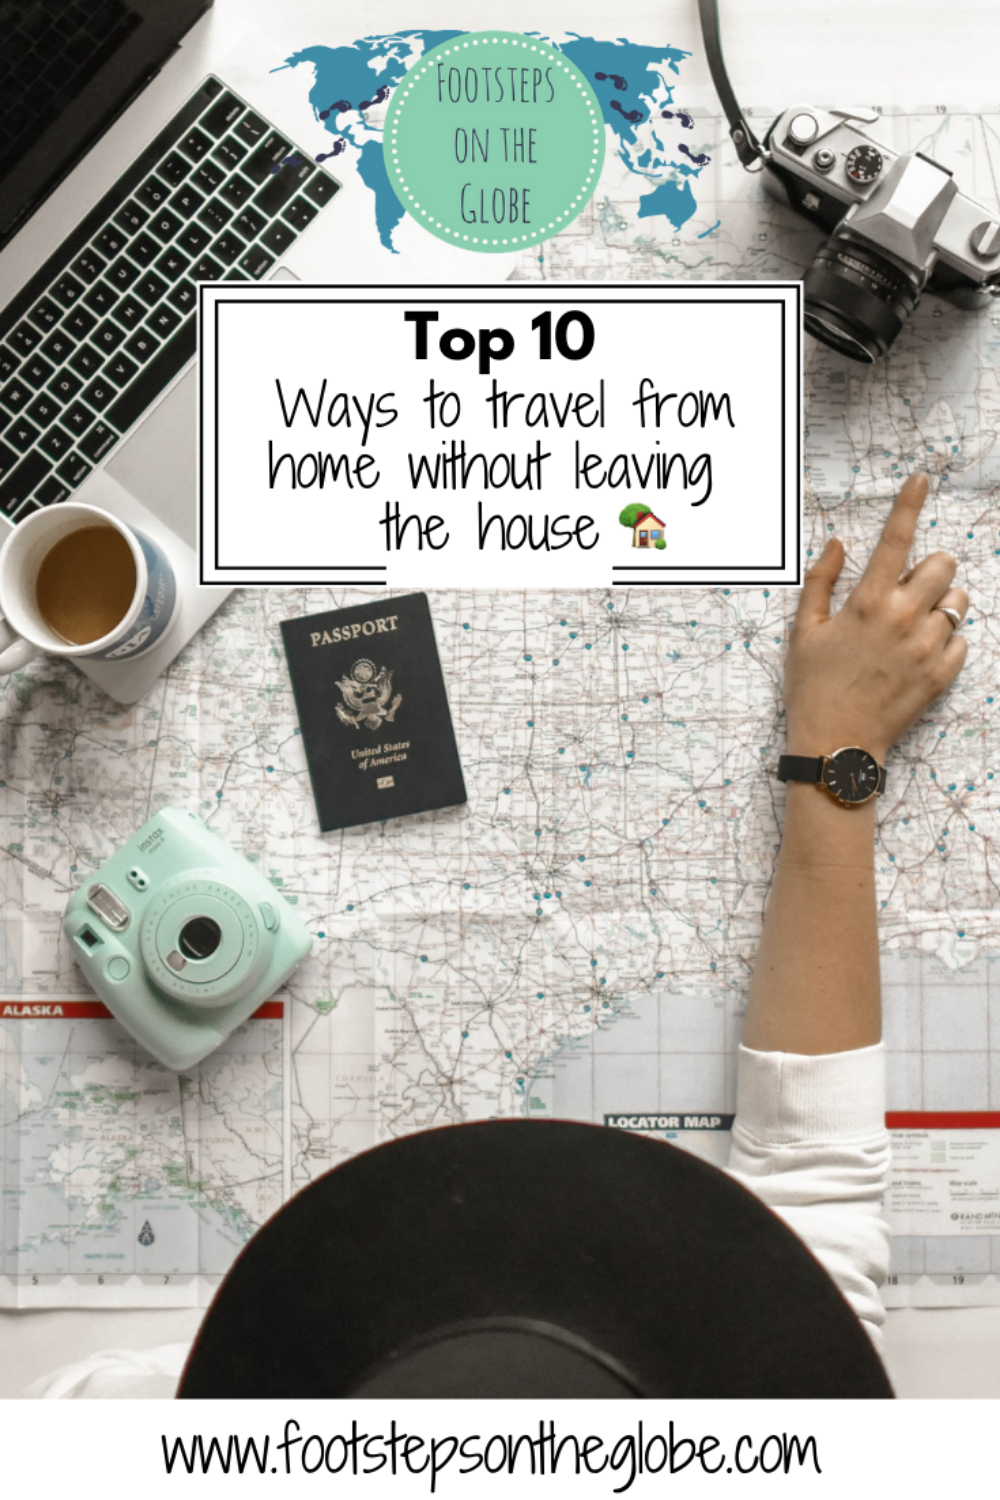 Top 10 ways to travel from home without leaving the house pinterest imgae